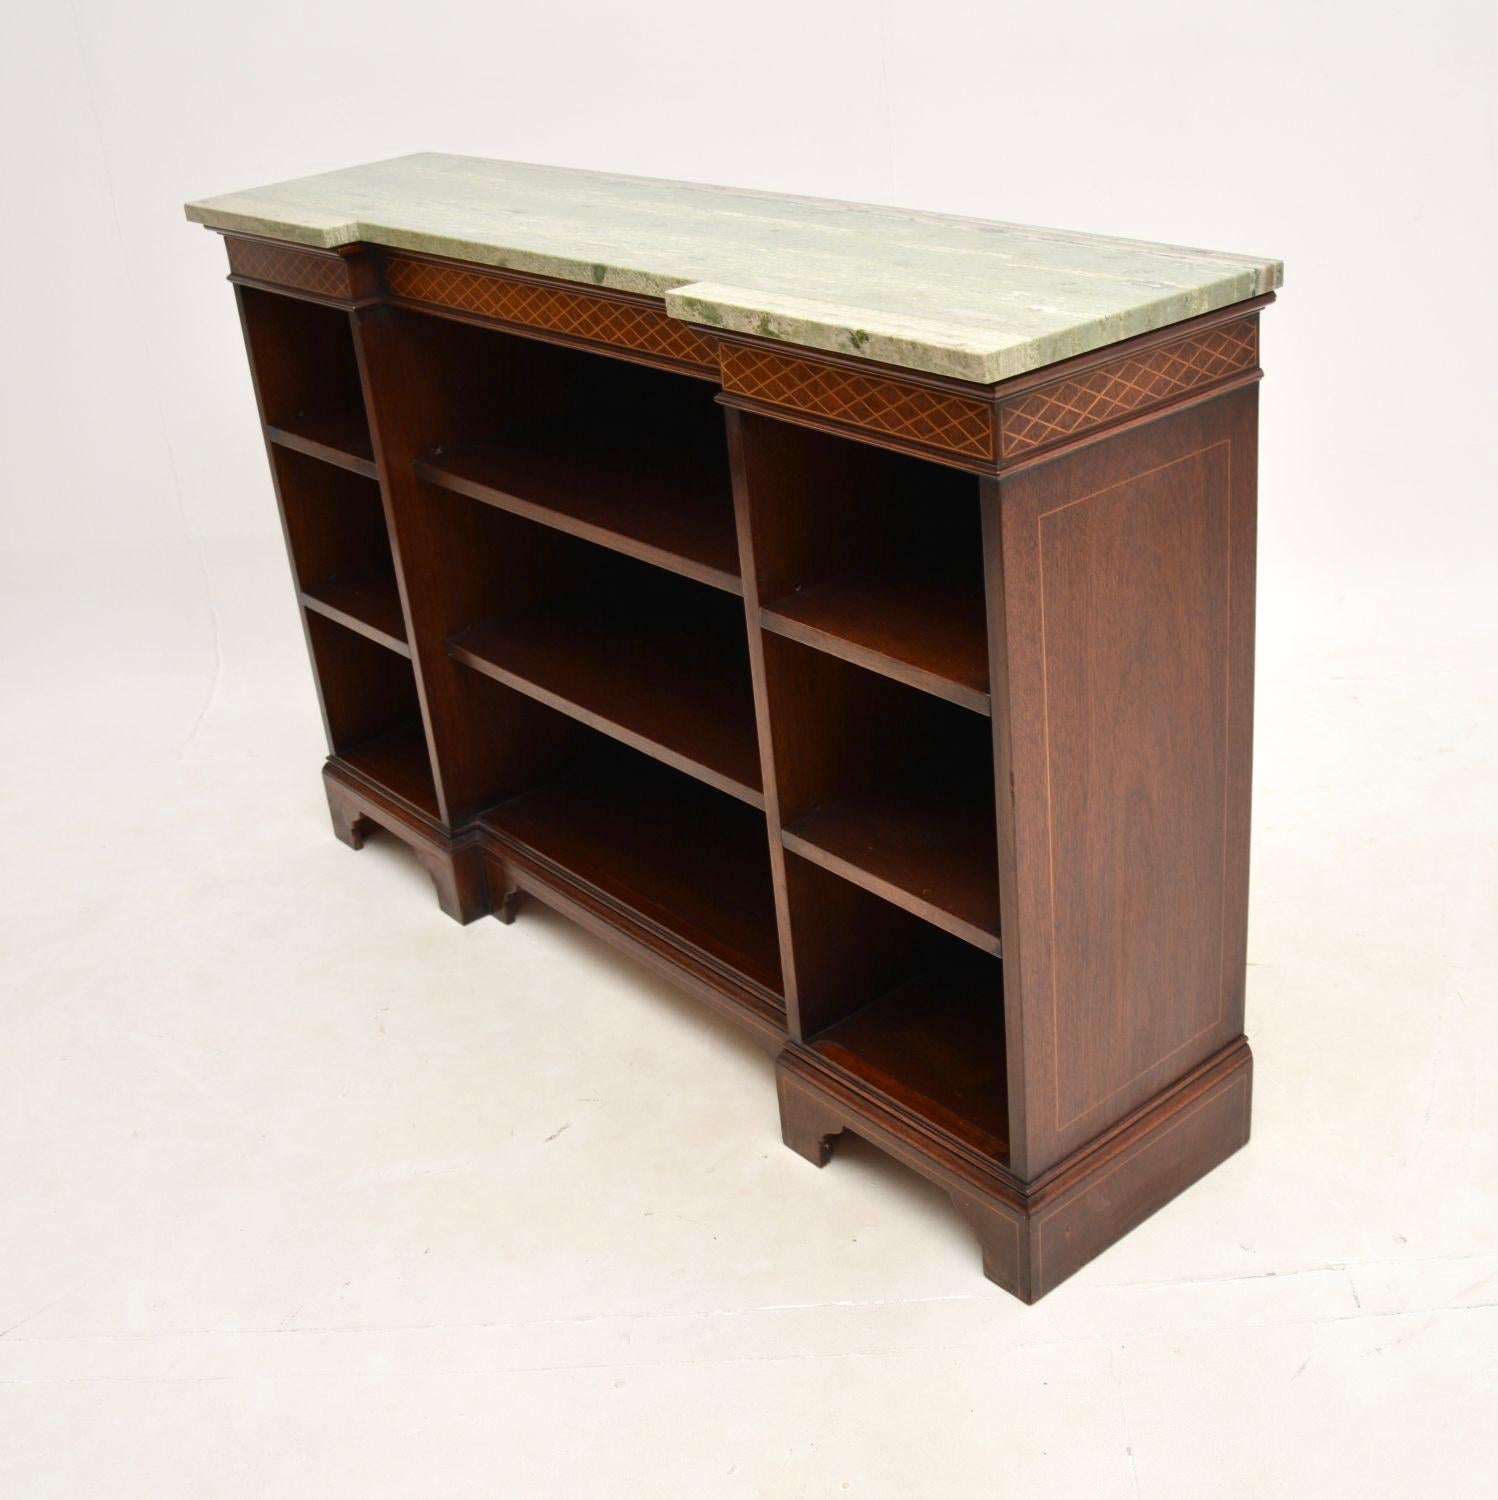 British Antique Marble Top Open Bookcase / Sideboard For Sale